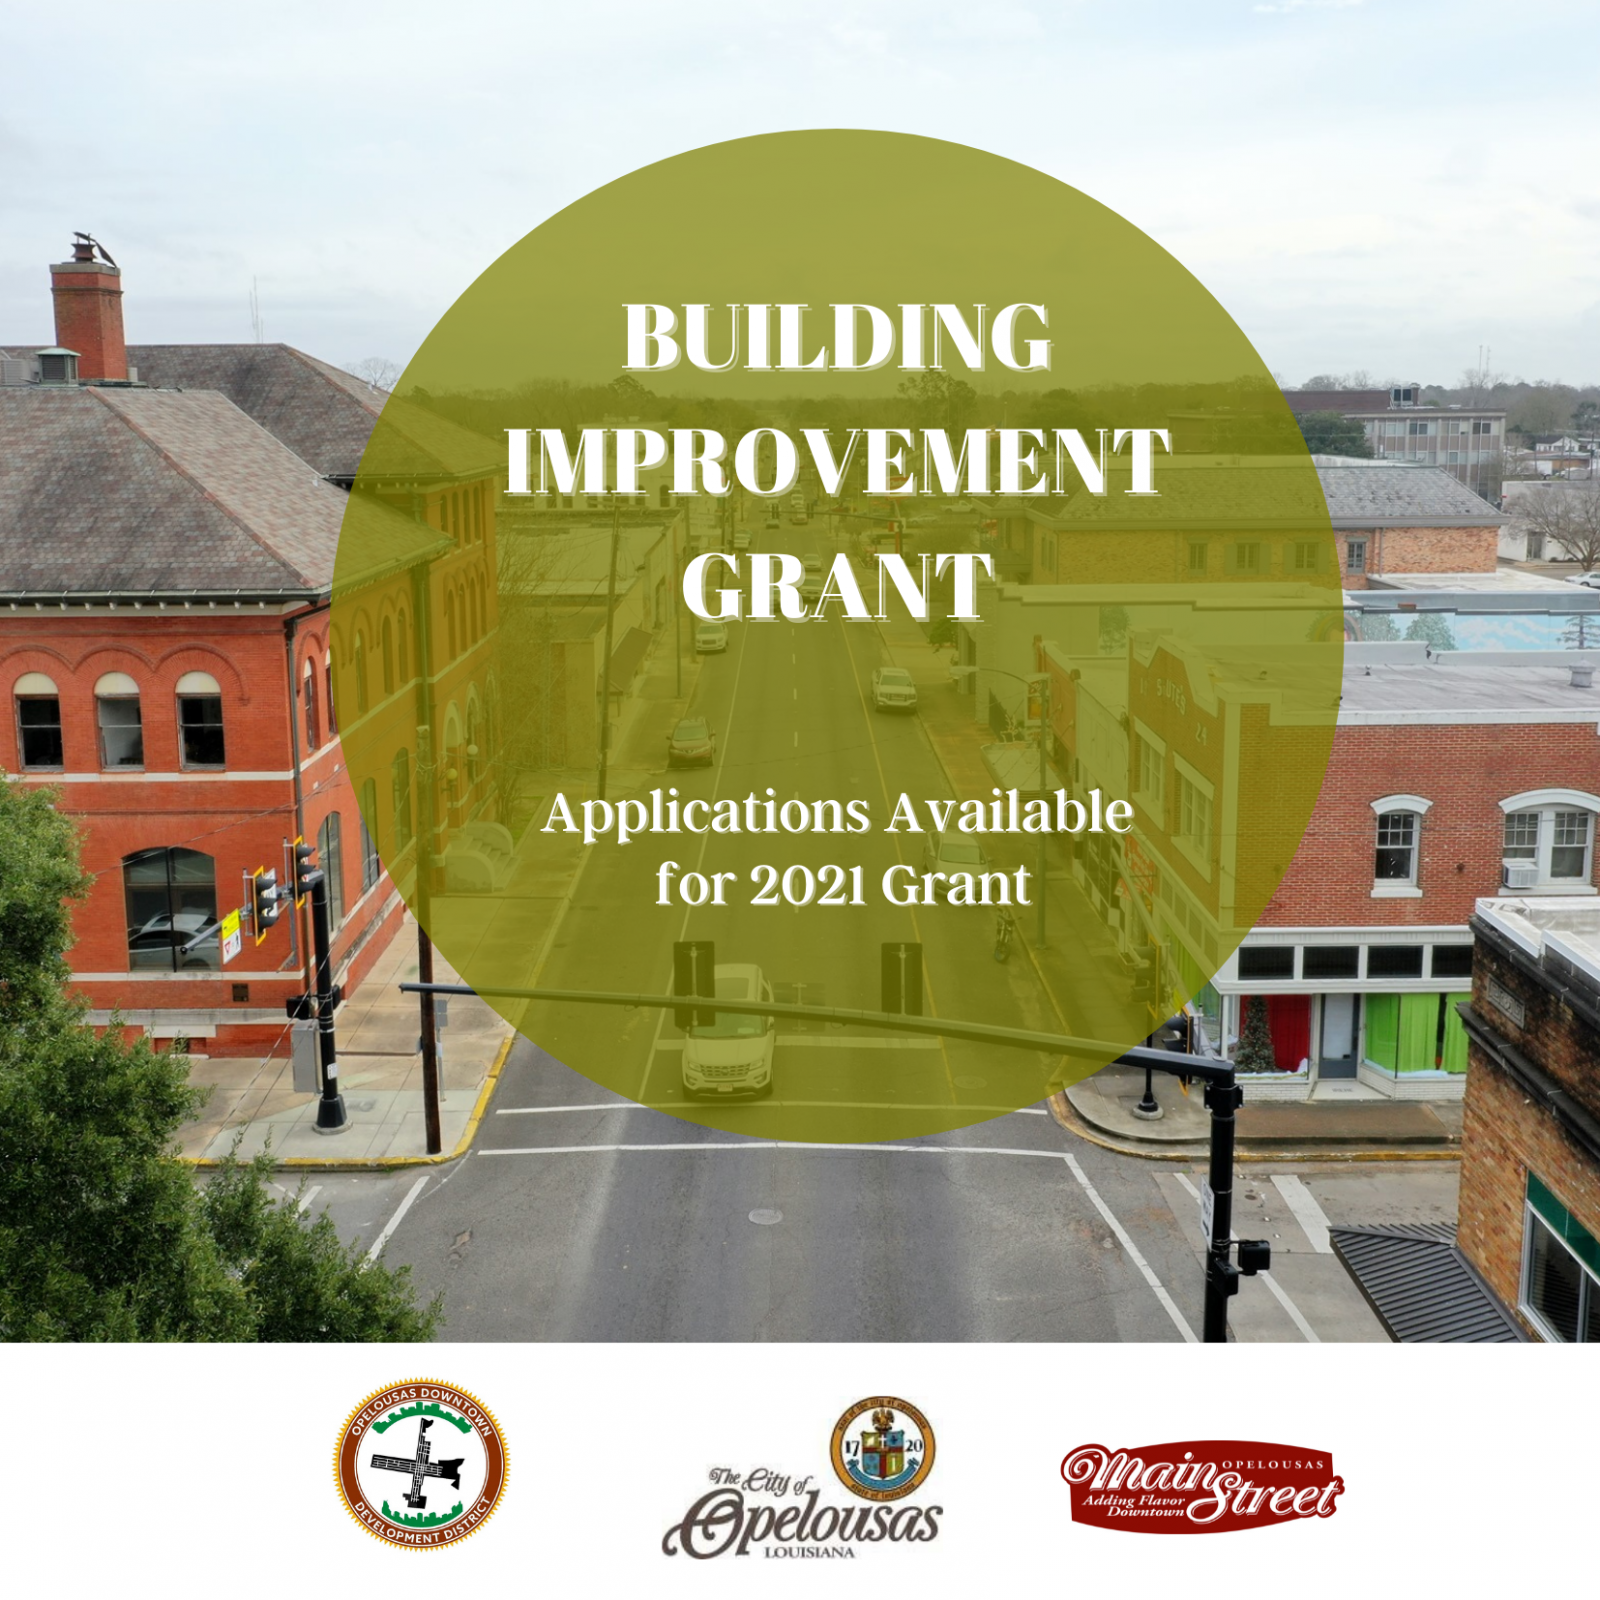 BUILDING IMPROVEMENT GRANT INITIATIVE ANNOUNCED FOR QUALIFIED OPELOUSAS BUSINESS OWNERS Photo